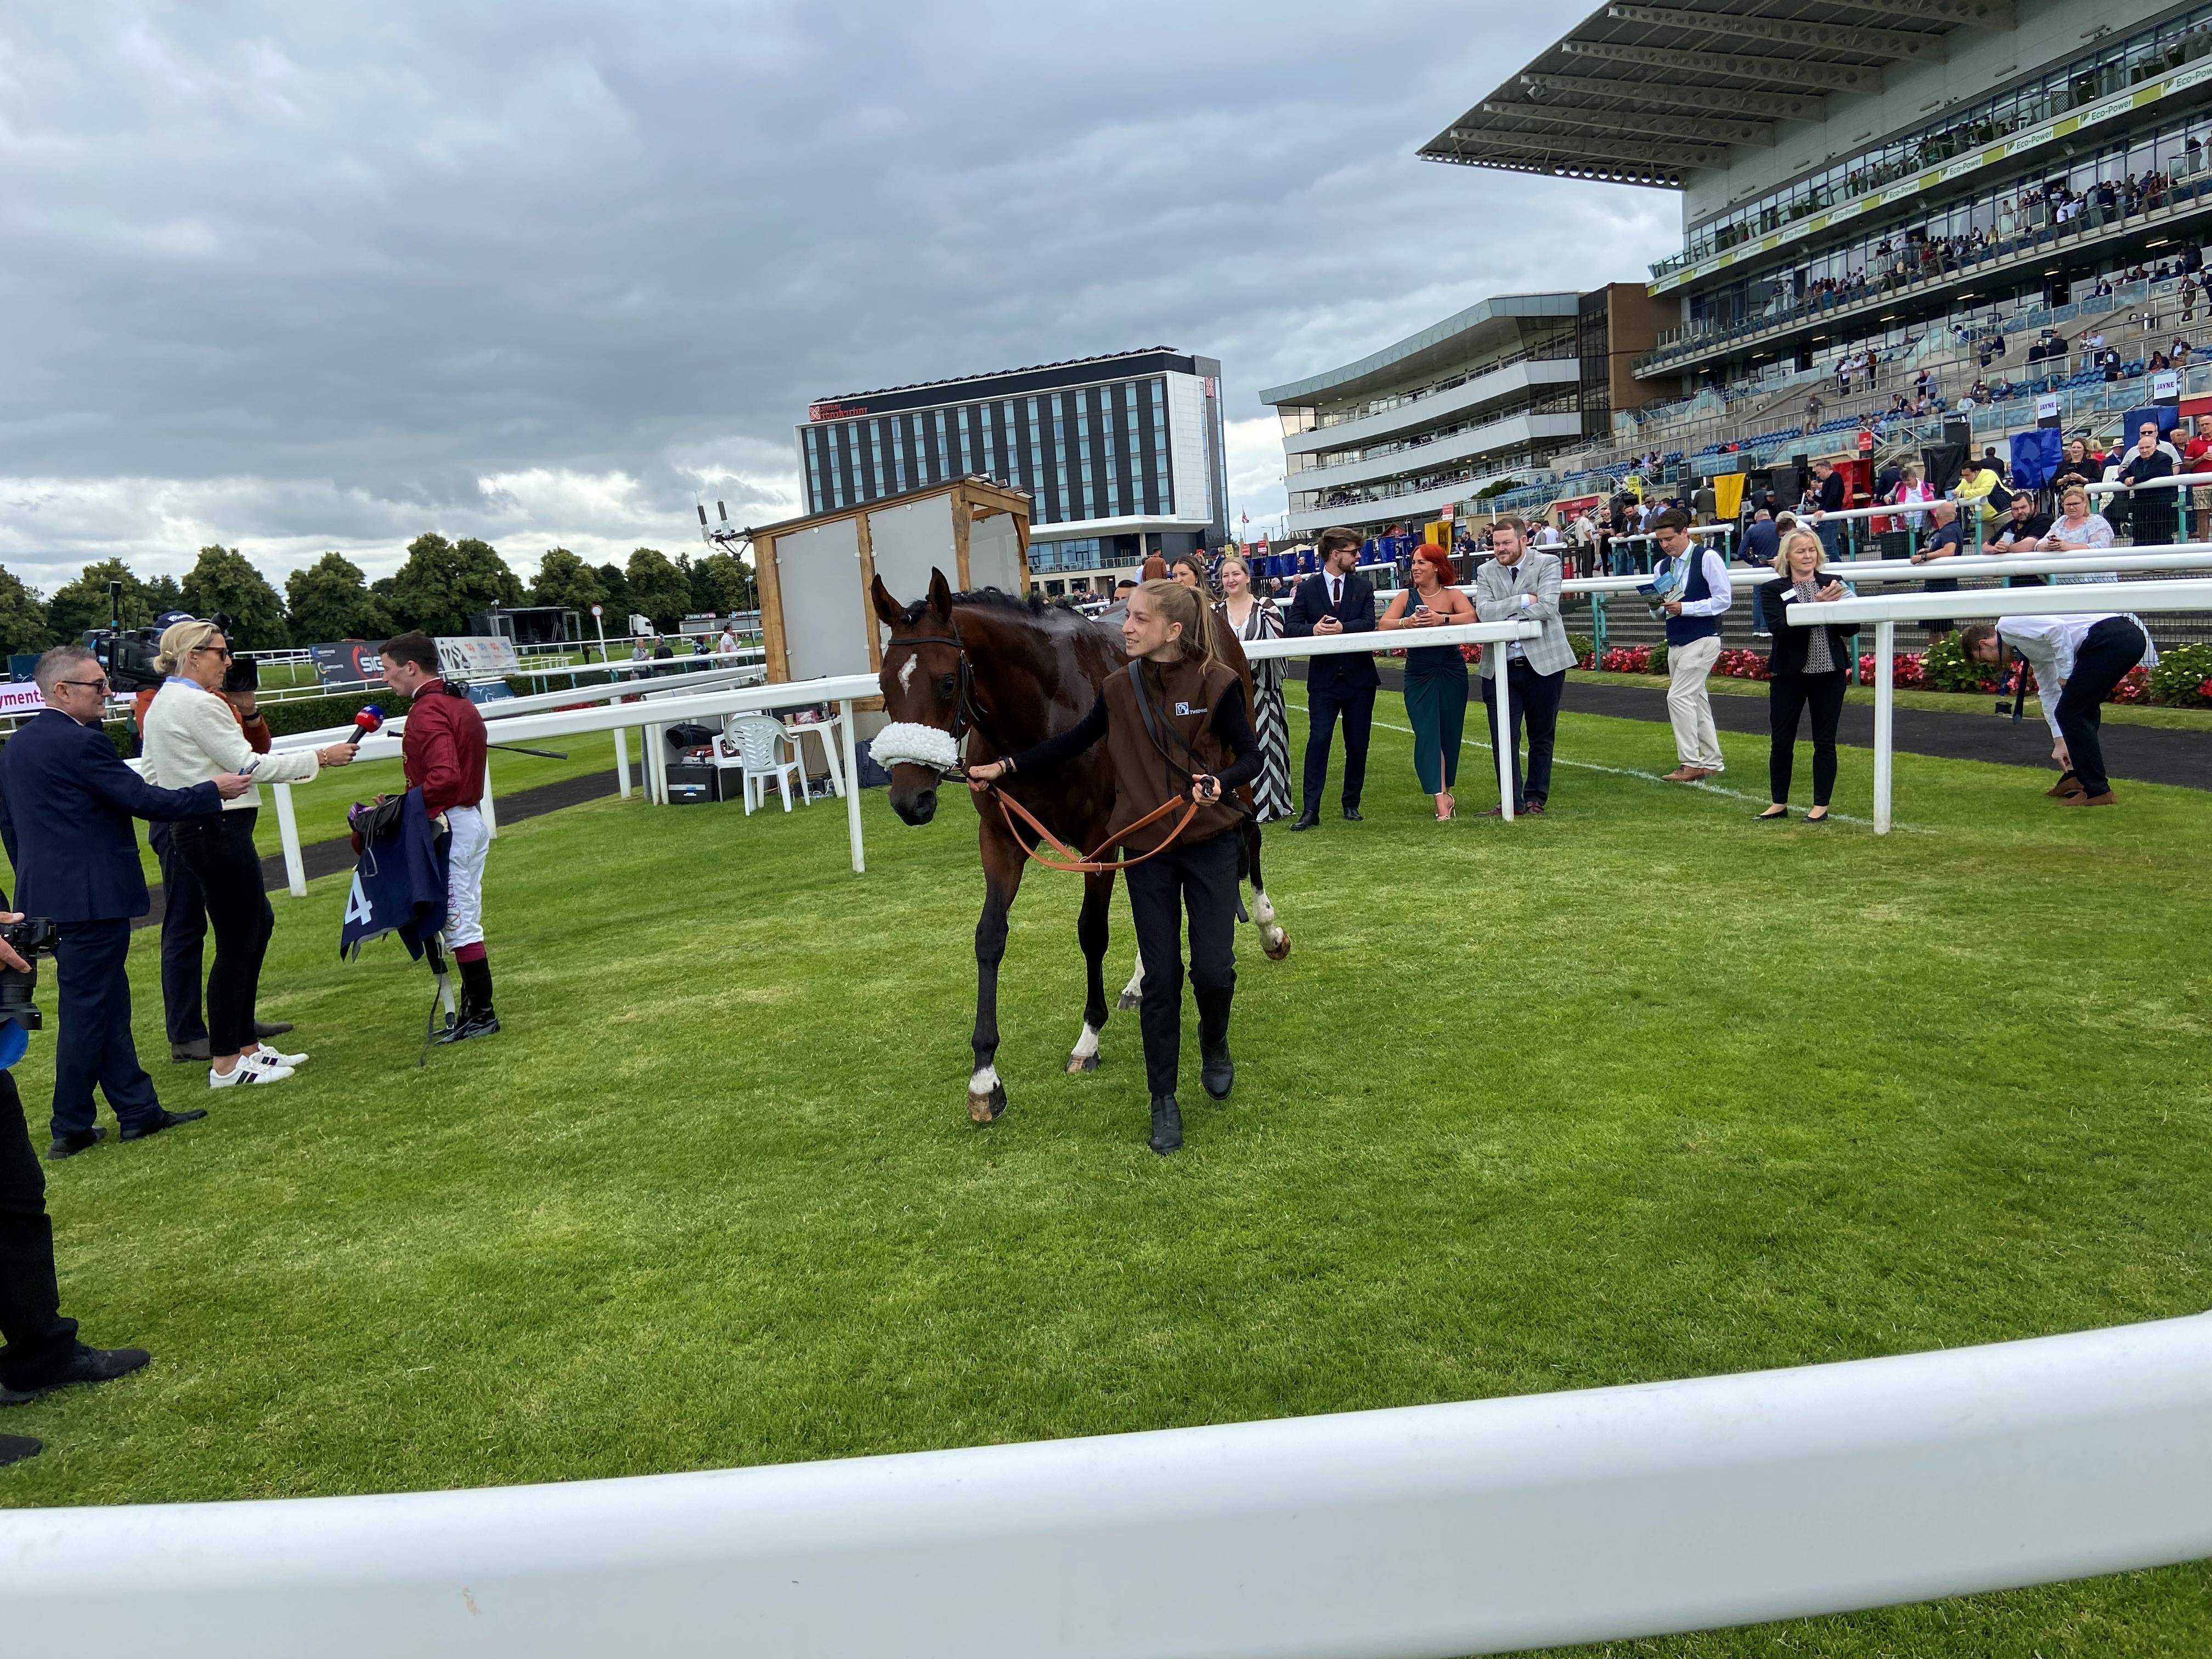 New Century in the winner's enclosure at Doncaster